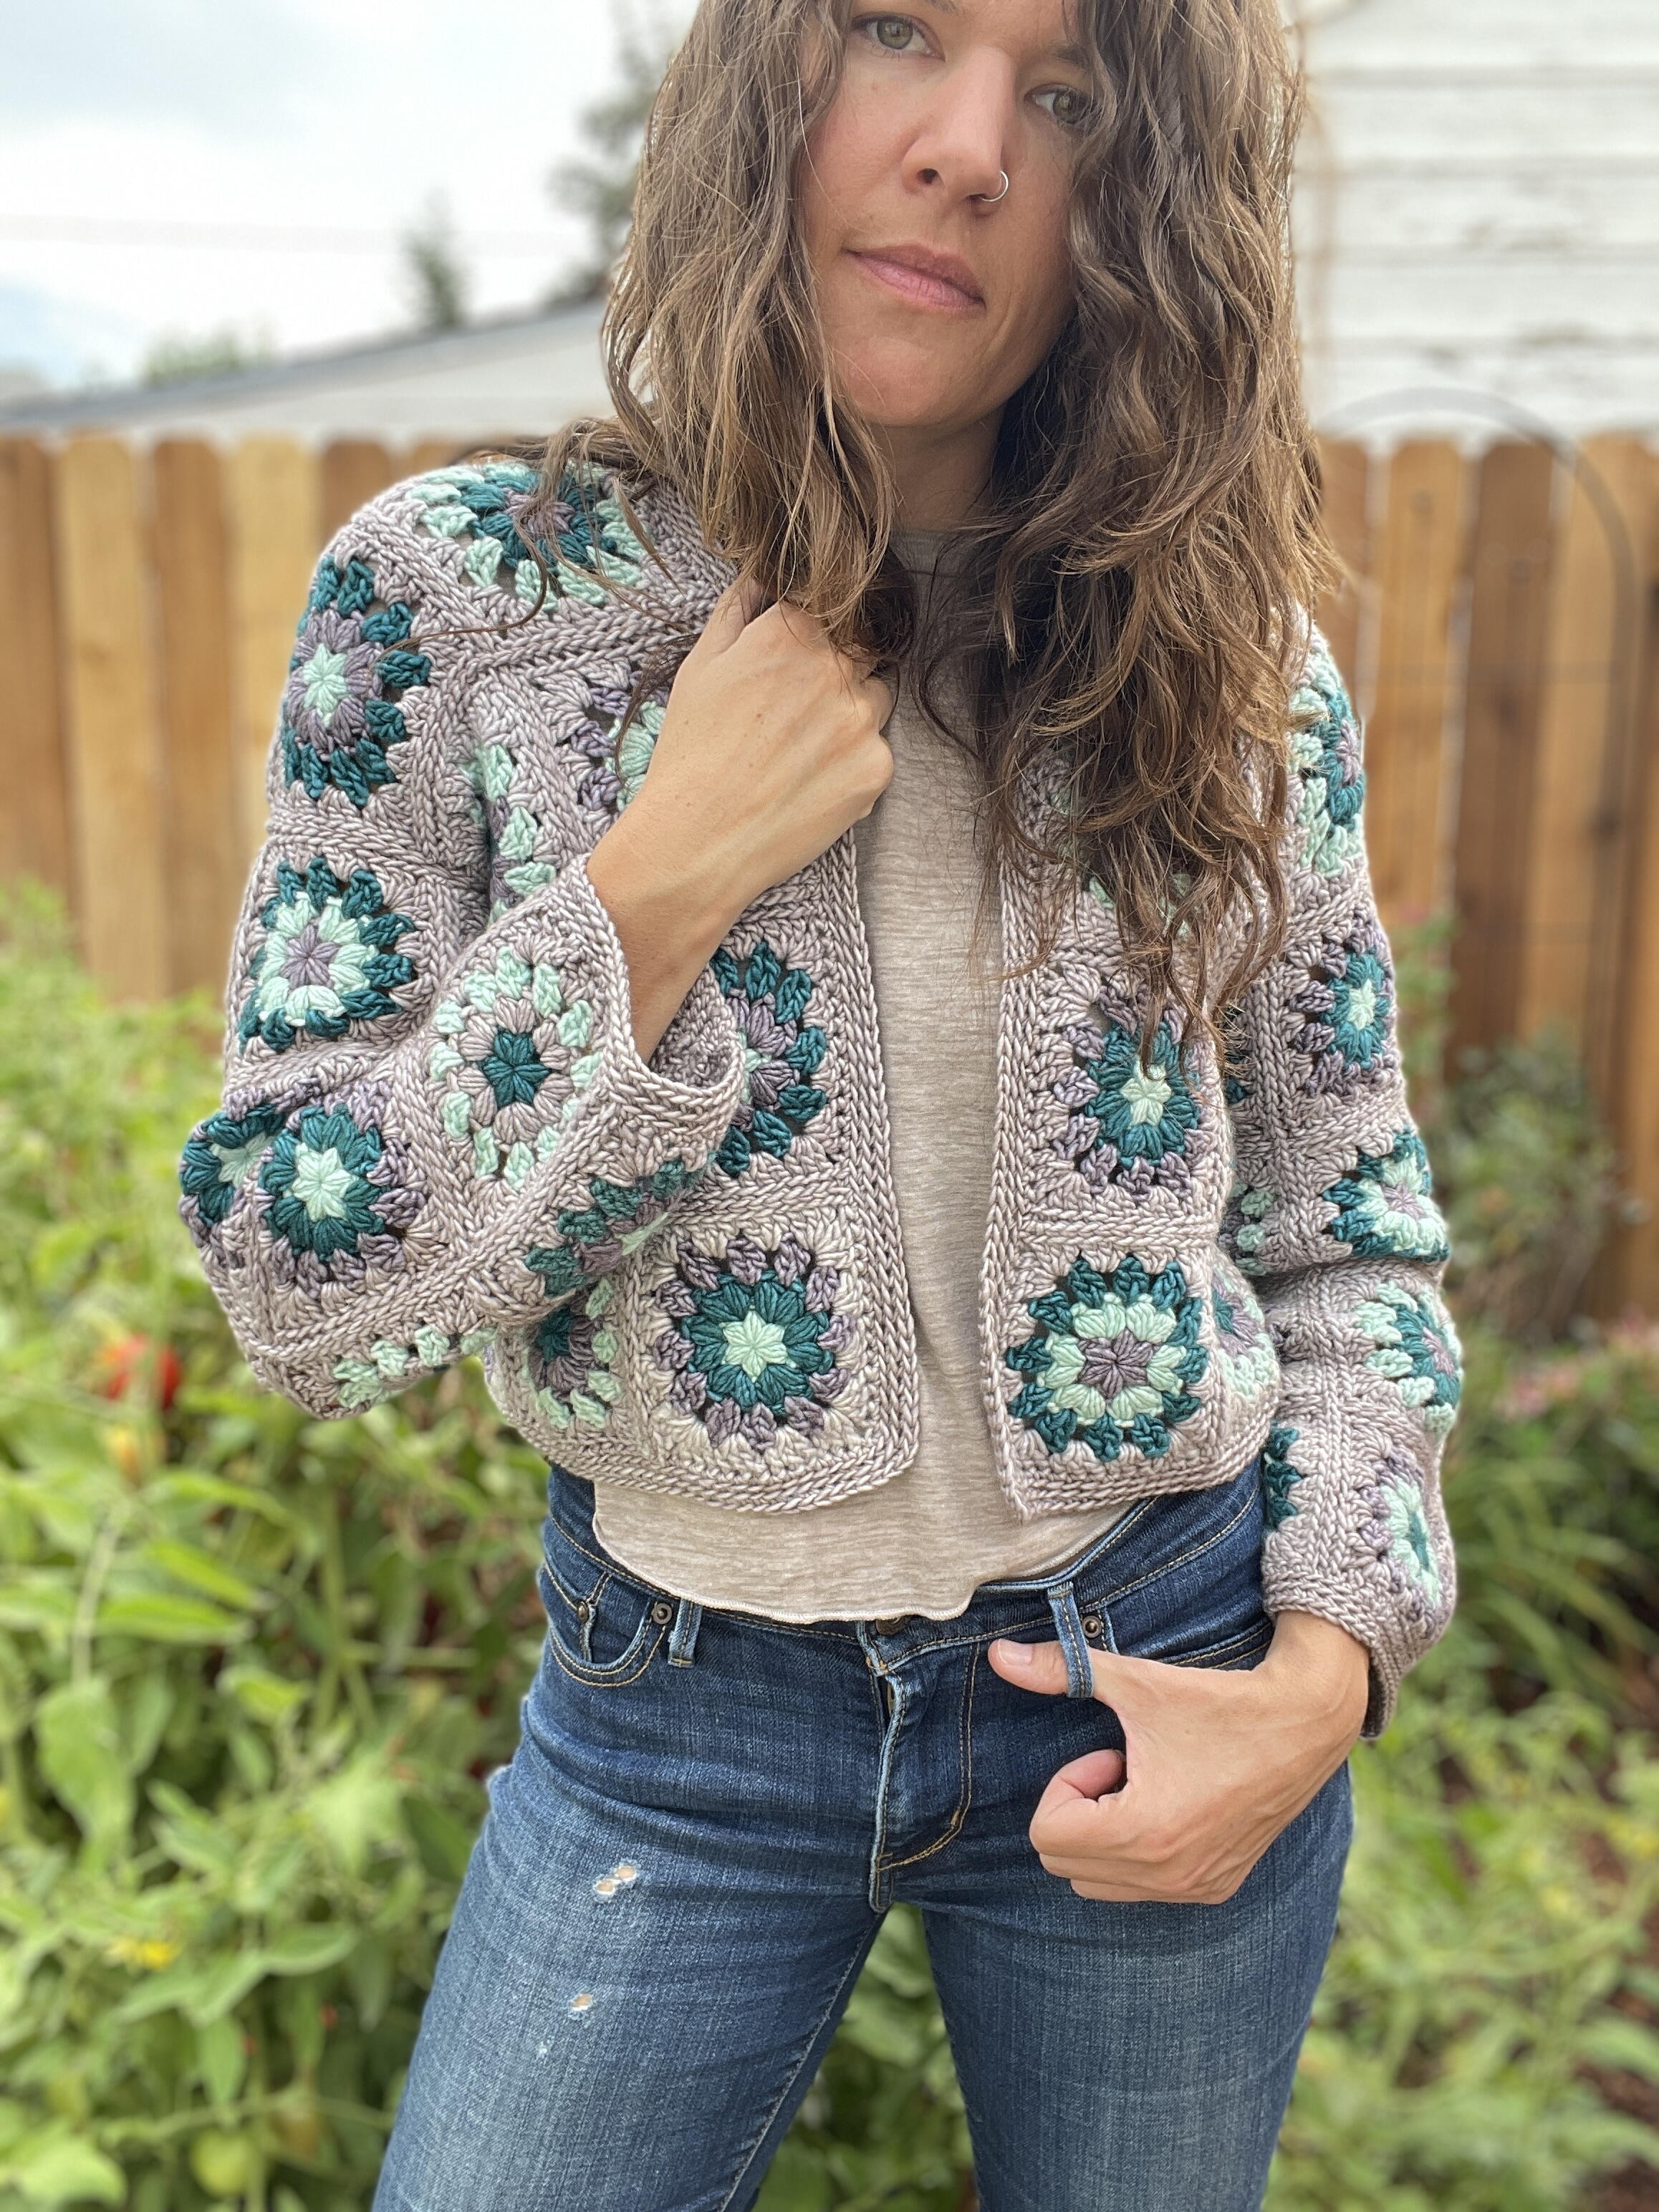 The Best 8 Granny Square Sweater Patterns - This is Crochet